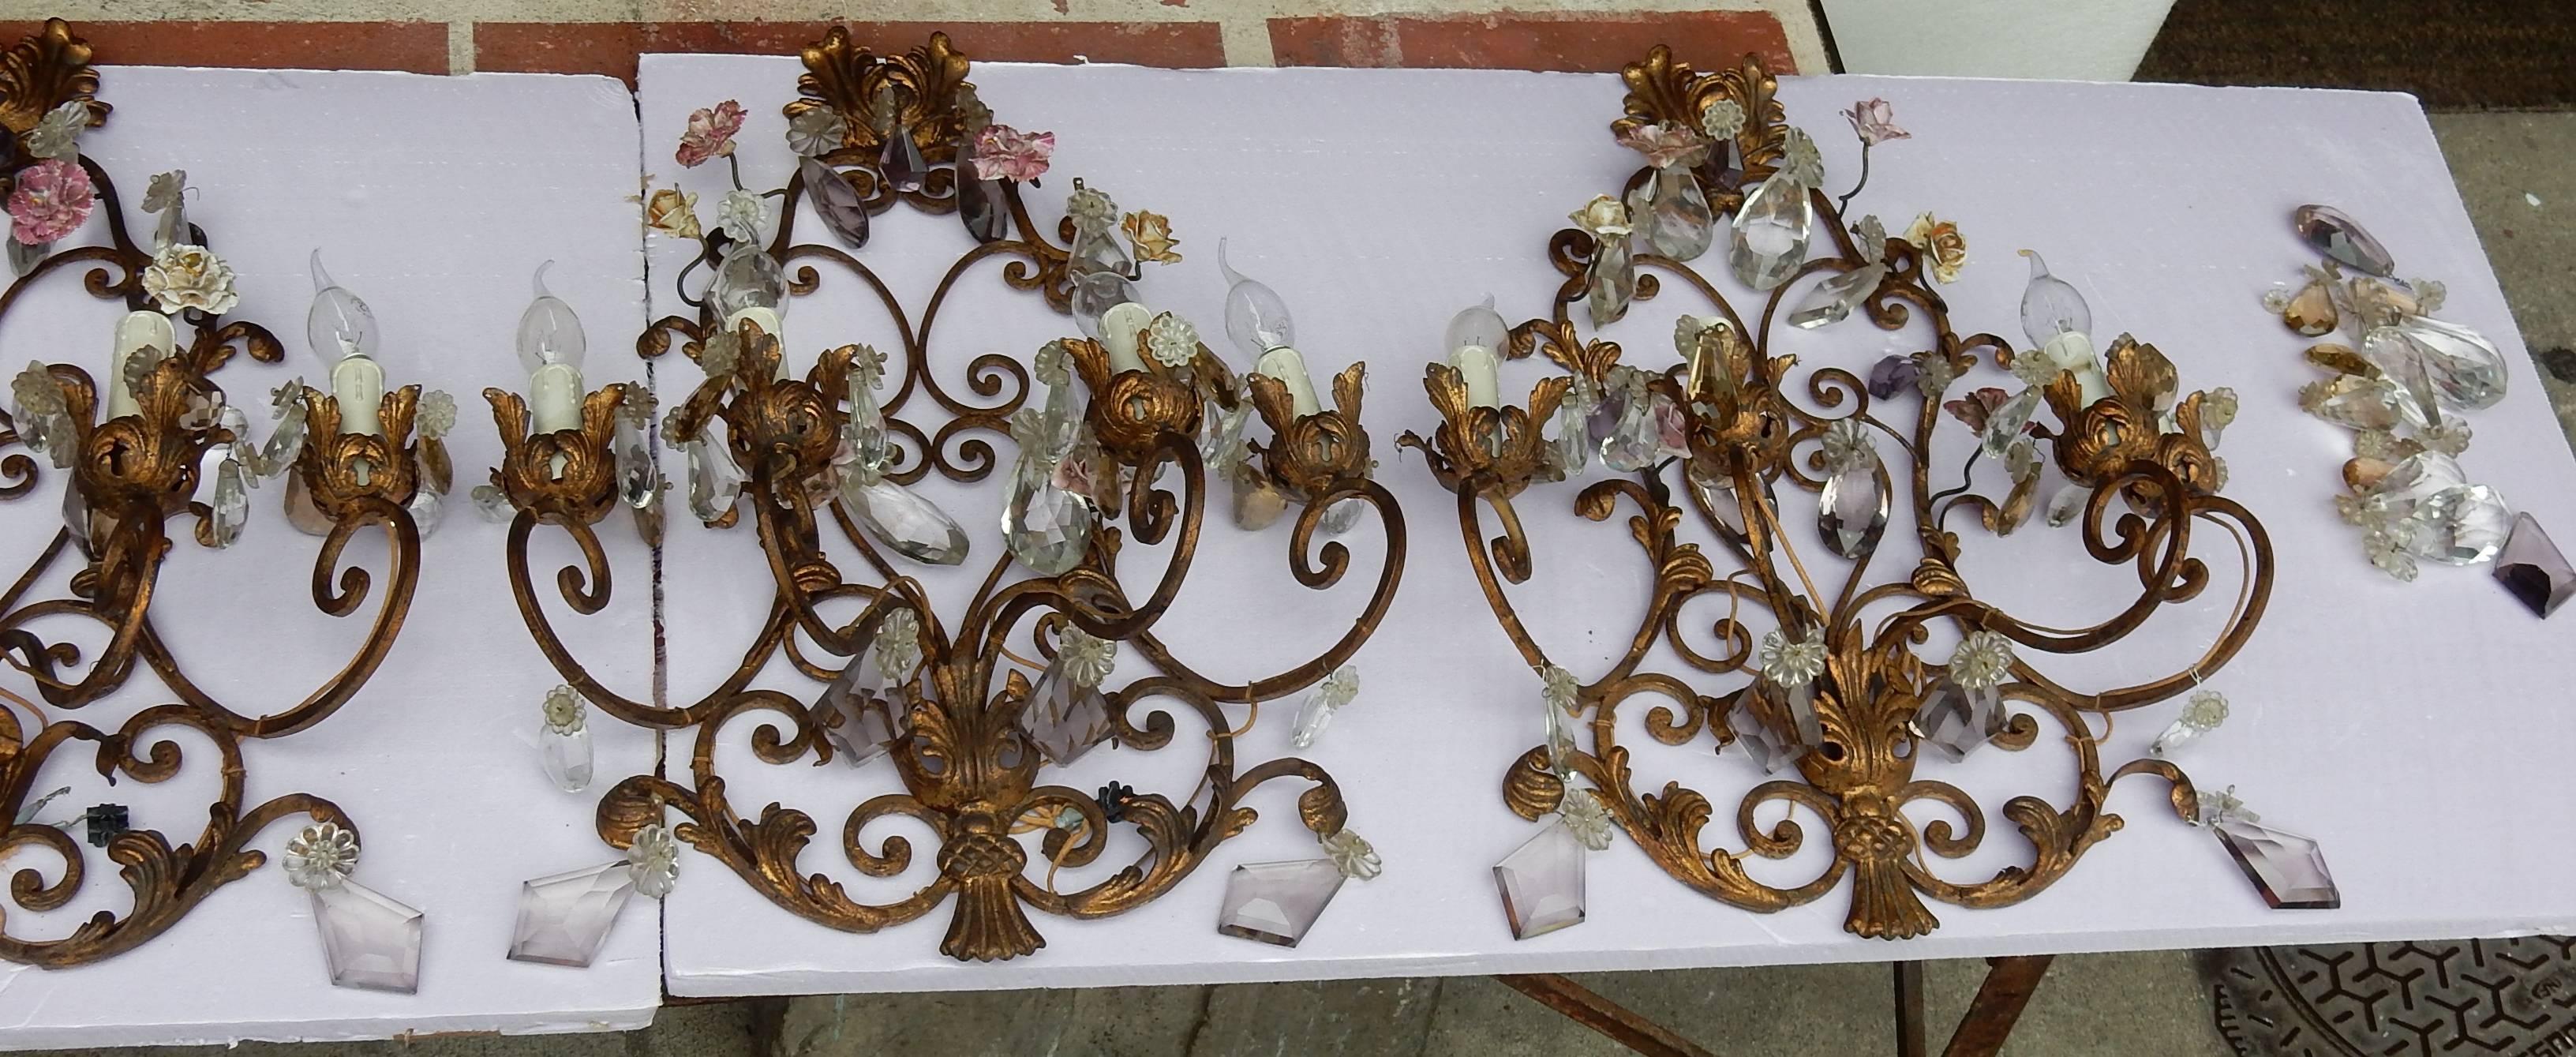 Series of four iron Wall lamps has four arms with light with foliage, clear crystals and color, ceramic flowers style Maisen
Condition of use, circa 1900.